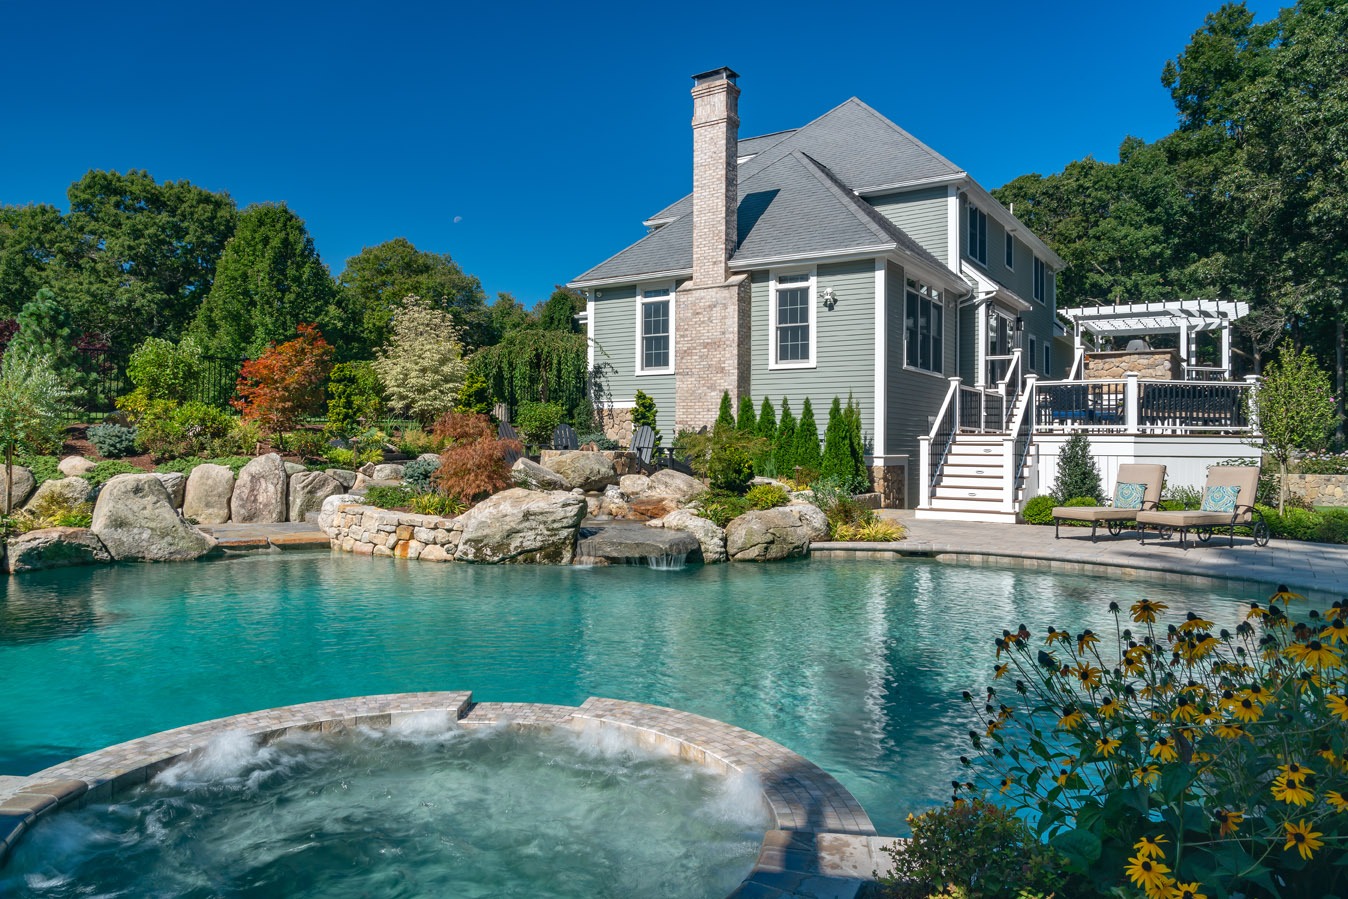 This image shows a luxurious backyard with a landscaped garden, an outdoor pool, whirlpool, and a two-story house with a spacious deck.